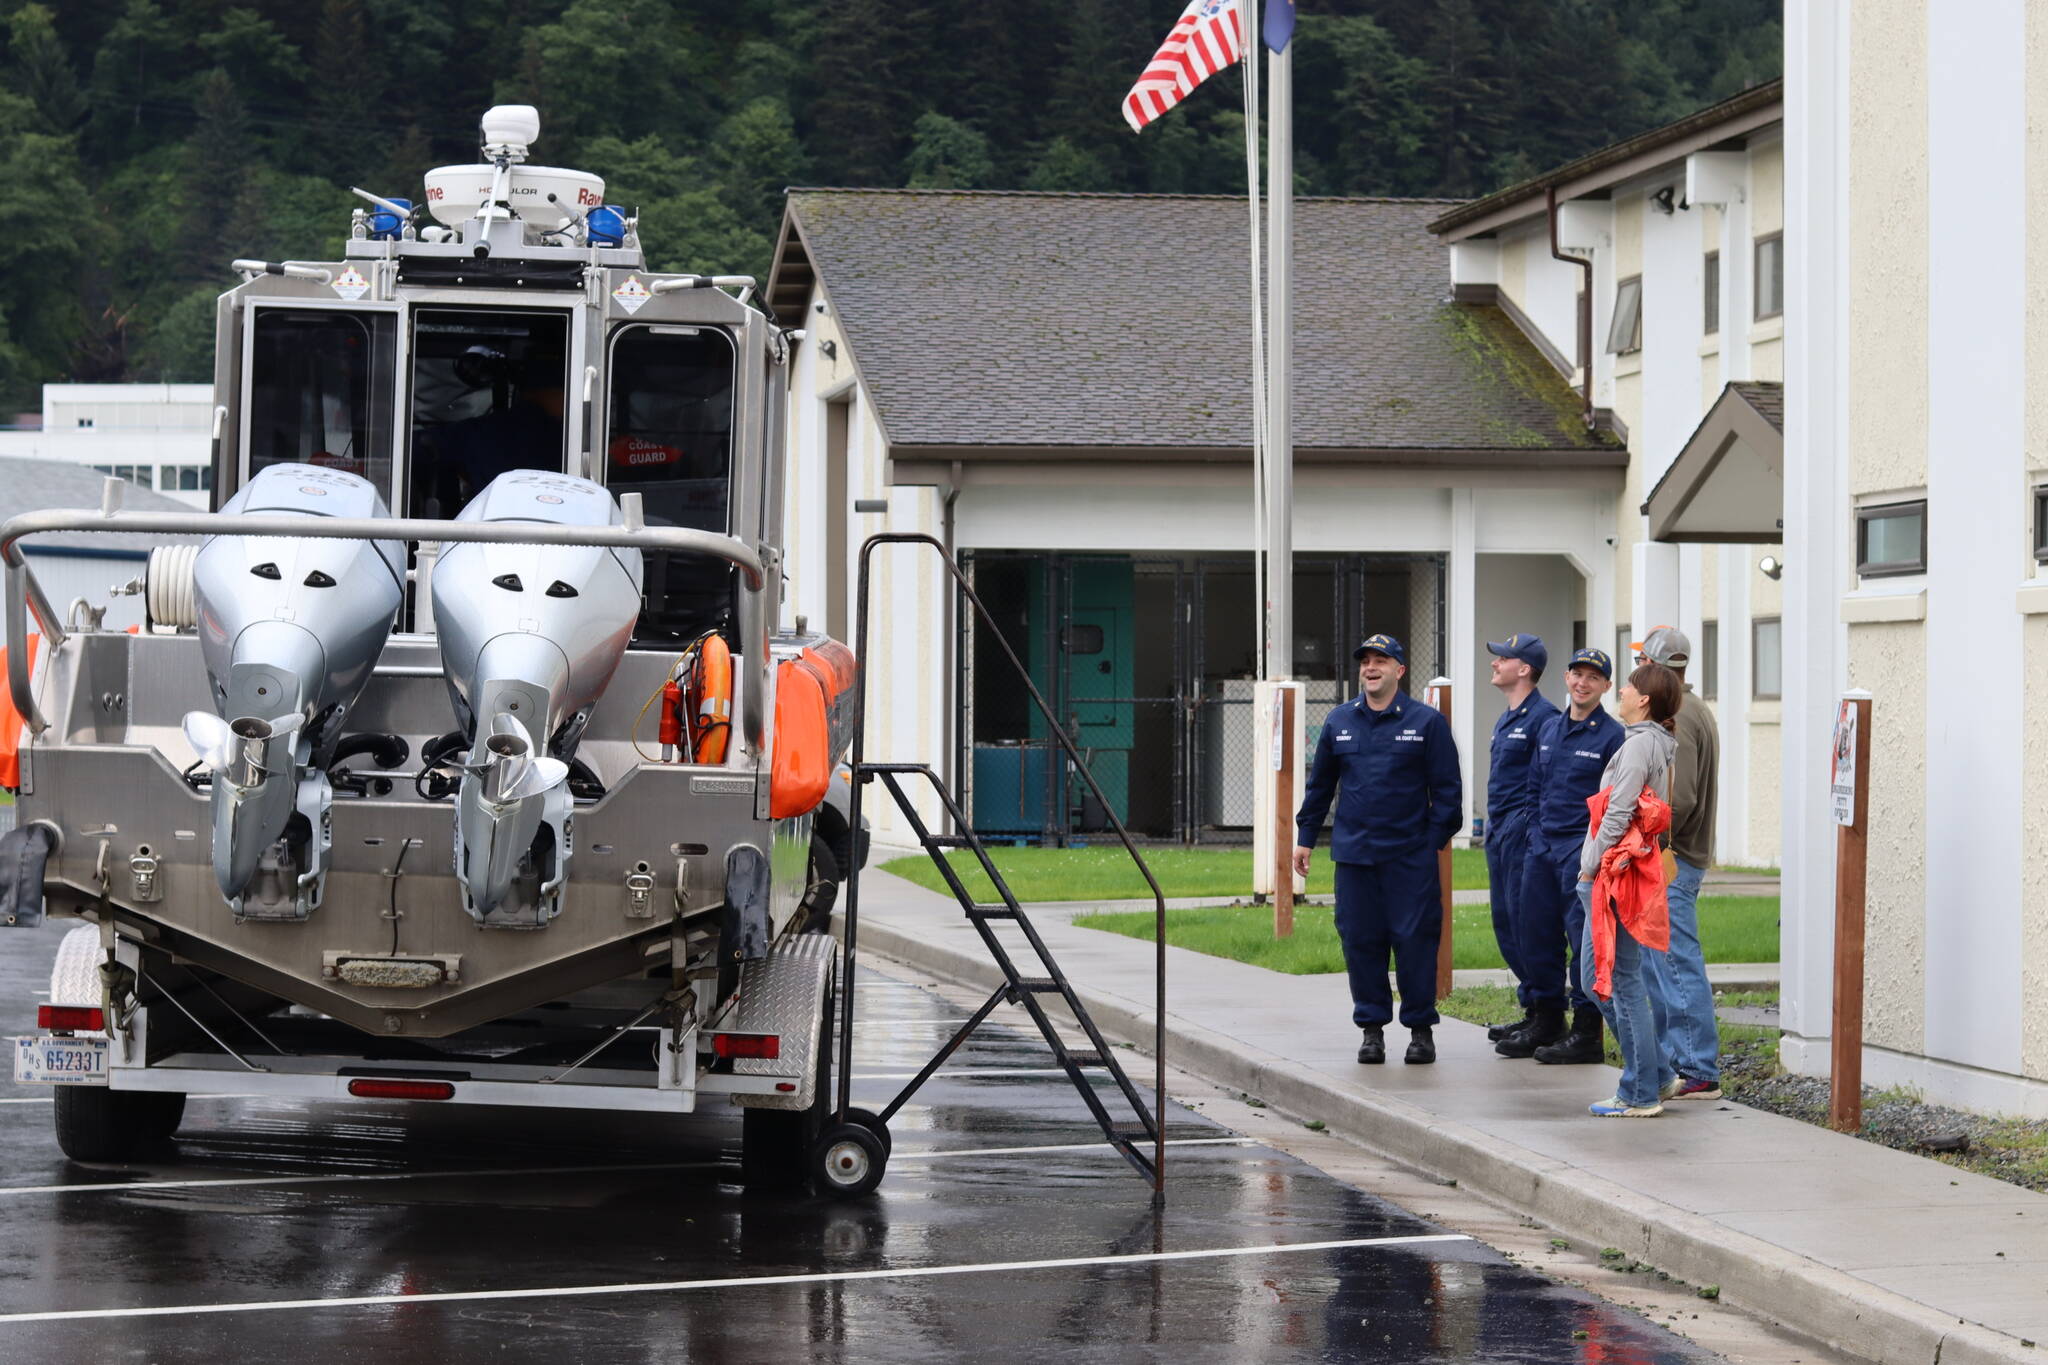 U.S. Coast Guard Chief Petty Officer Nicholas Sedberry is joined by other service members and visitors aside a 29-foot Coast Guard response boat during National Night Out events in Juneau on Tuesday. (Meredith Jordan / Juneau Empire)